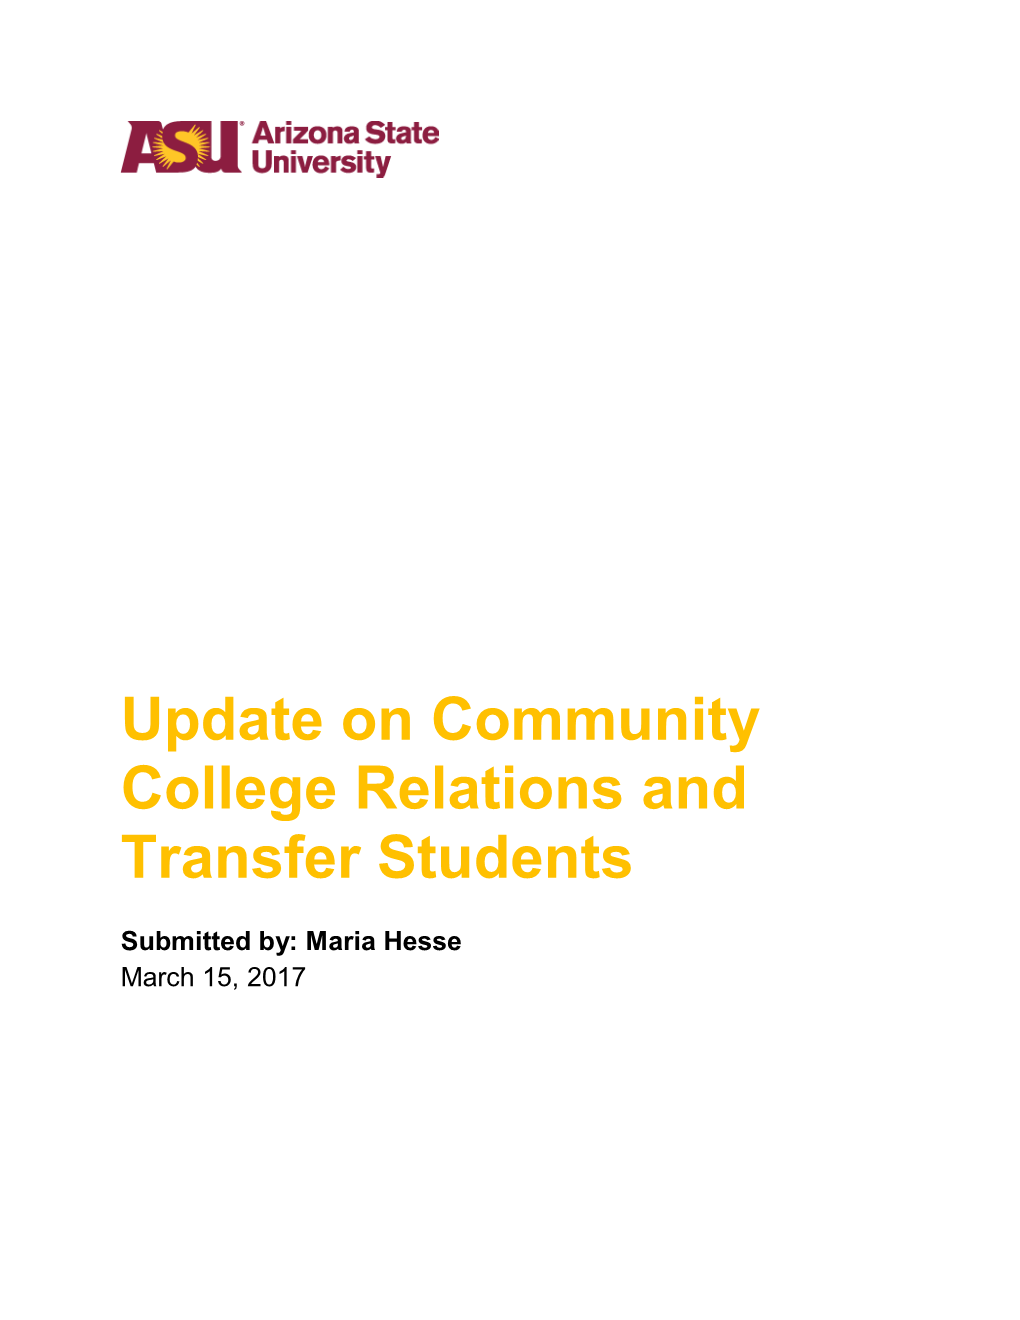 Update on Community College Relations and Transfer Students